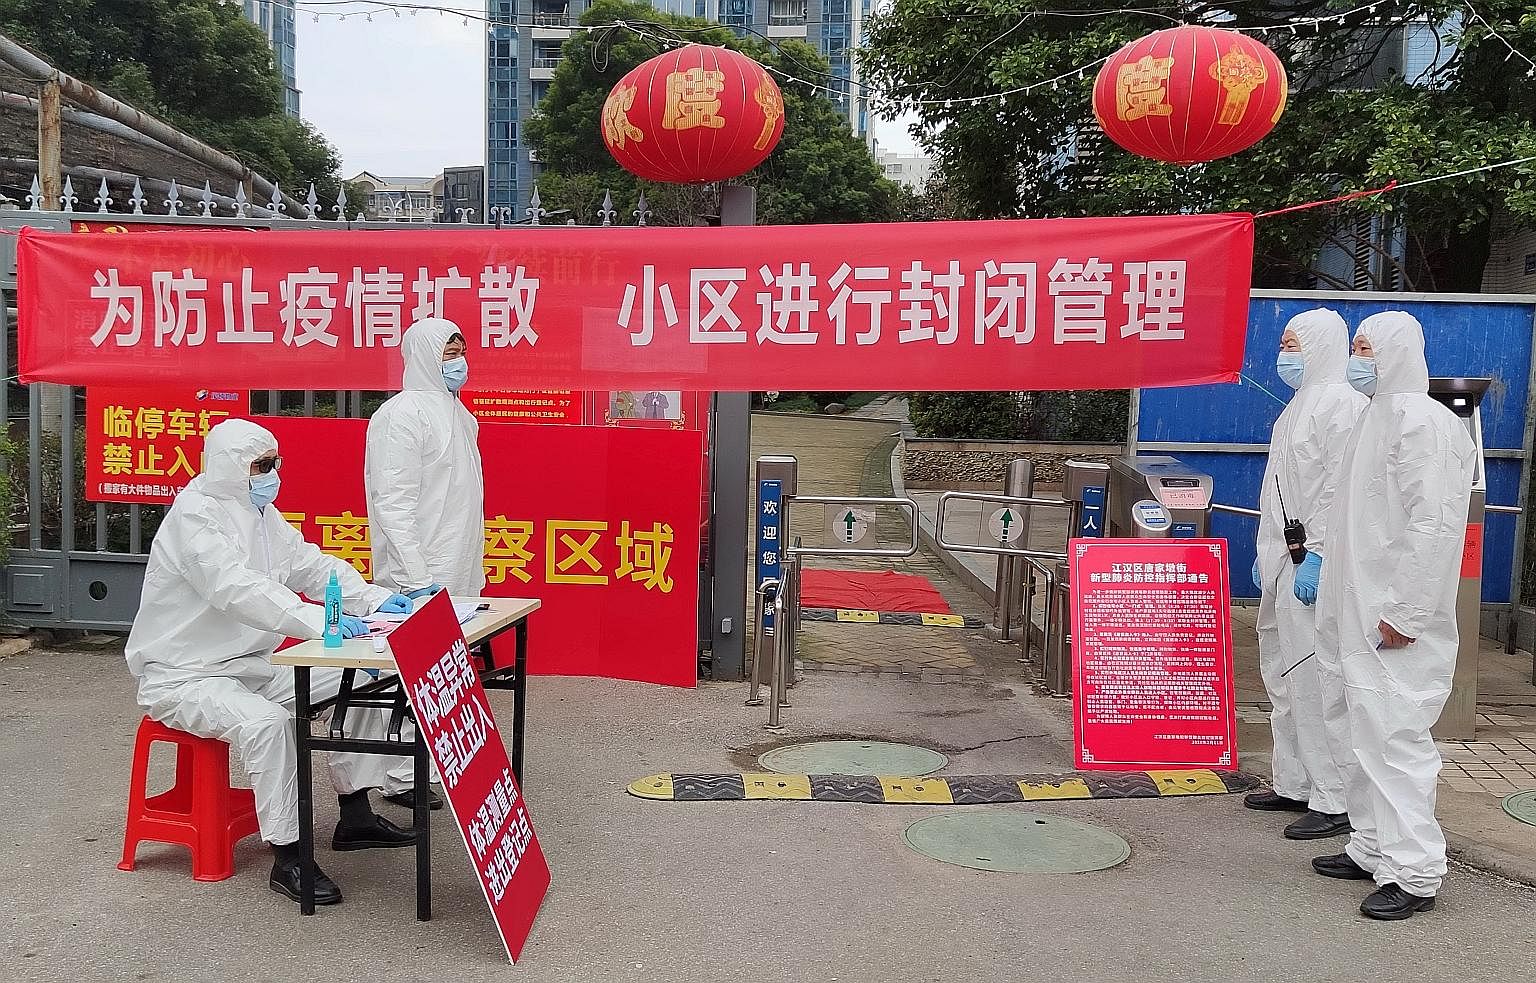 Workers manning a checkpoint where visitors have to register and get their temperature taken at an entrance to a residential compound in Wuhan, Hubei province, on Thursday.